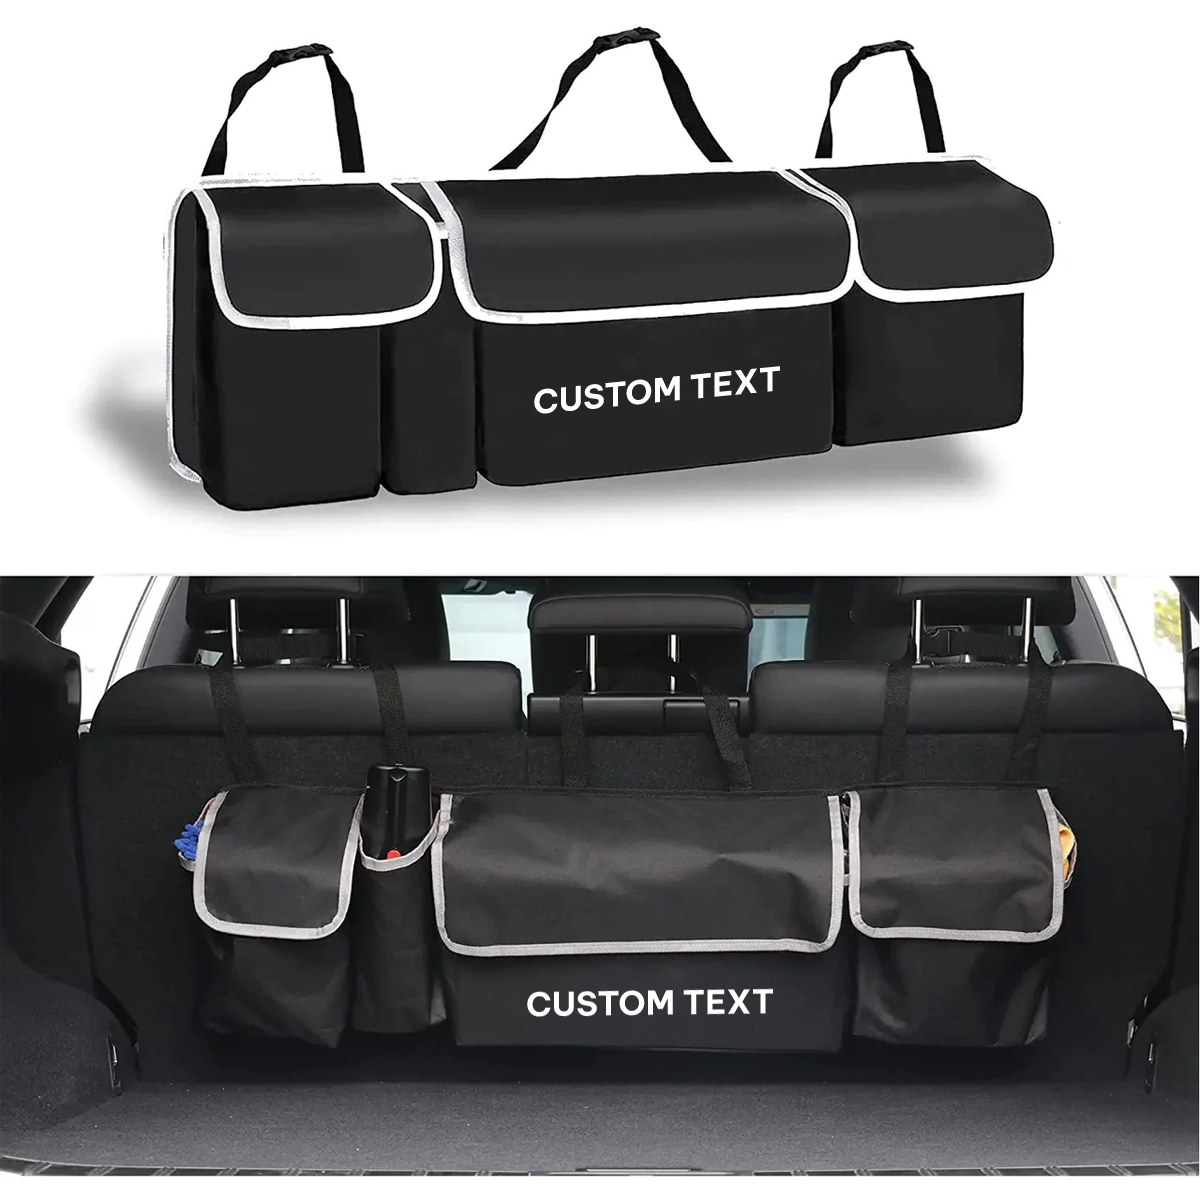 Custom Text Car Trunk Hanging Organizer, Thick Backseat Trunk Storage Bag with 4 Pockets and 3 Adjustable Shoulder Straps, Foldable Car Trunk Interior Accessories Releases Your Trunk Space